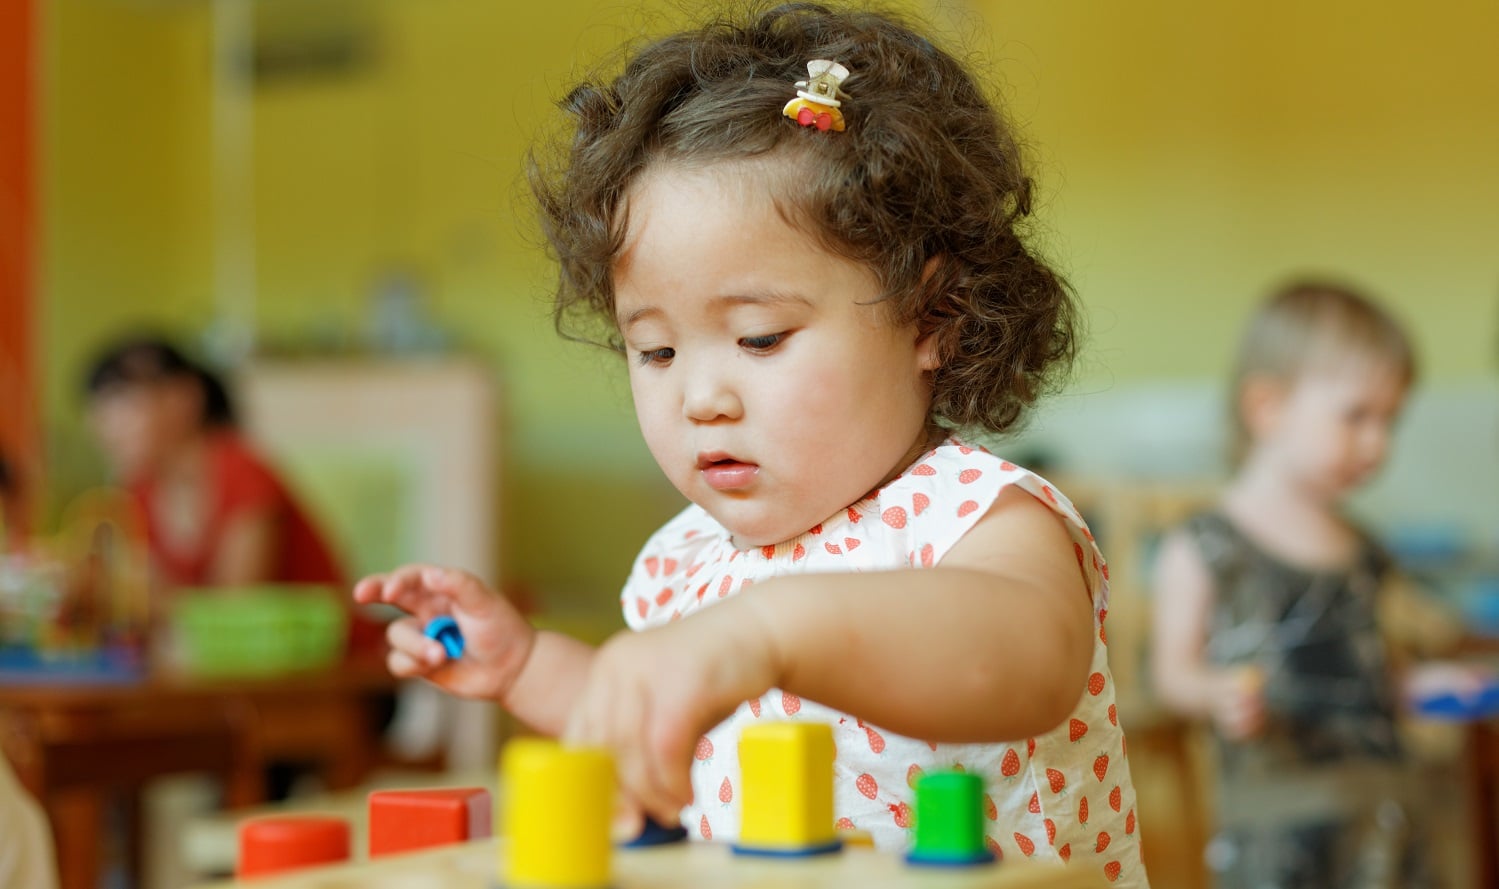 10 best preschools in delhi for your toddler - 5 Amazing Ways Your Toddler Can Benefit From Music-Making